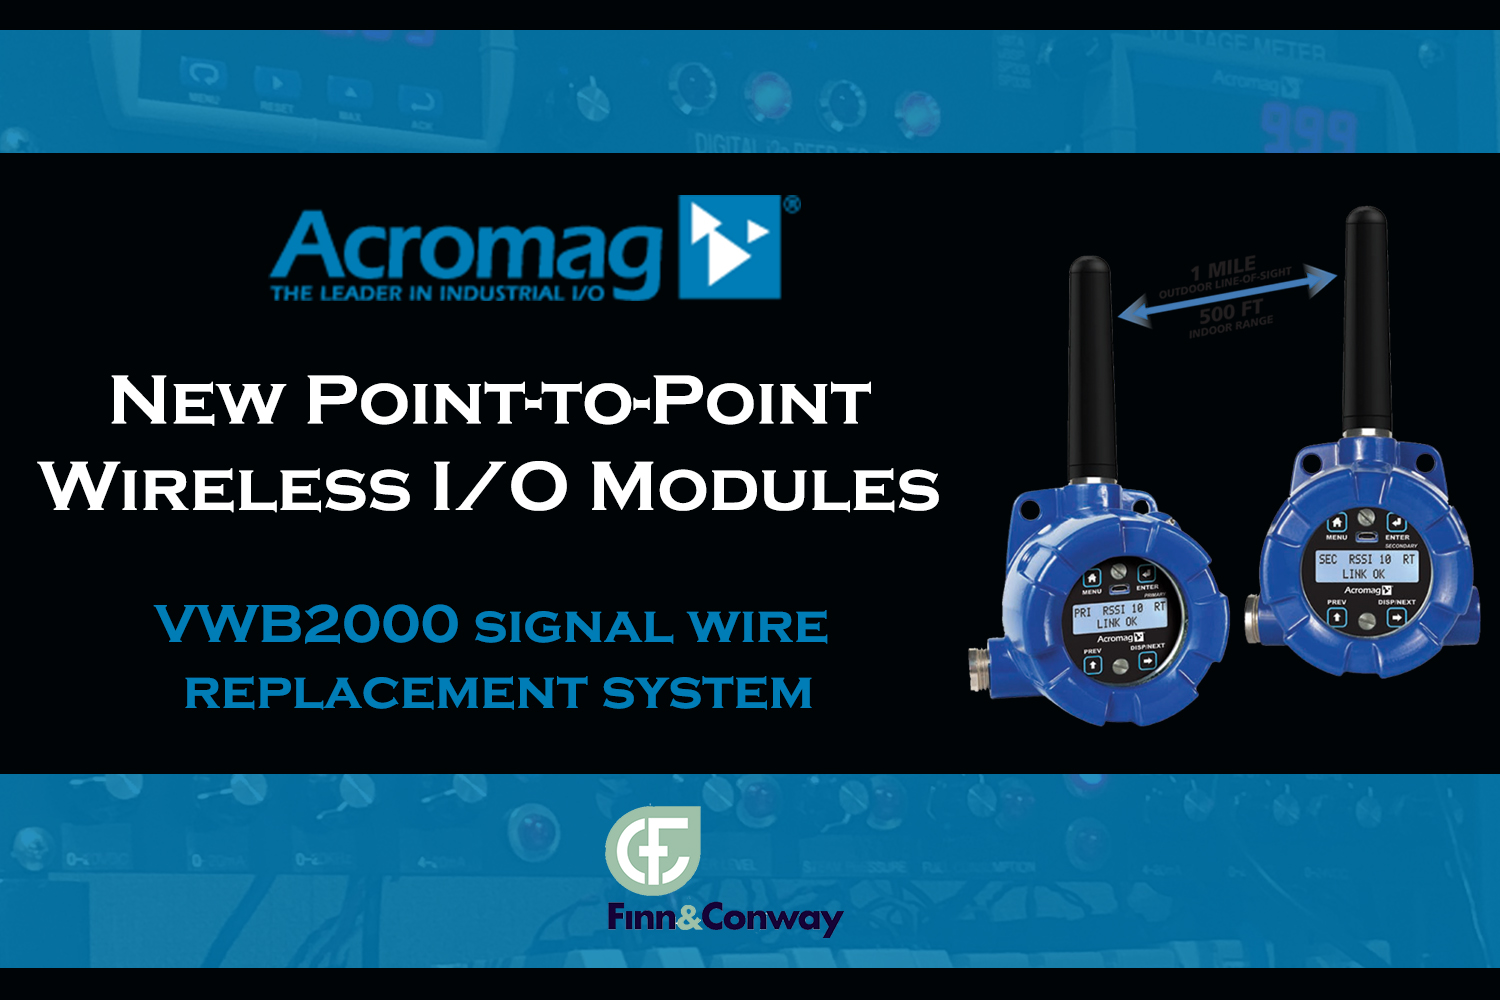 New Point-to-Point Wireless I/O Modules by Acromag